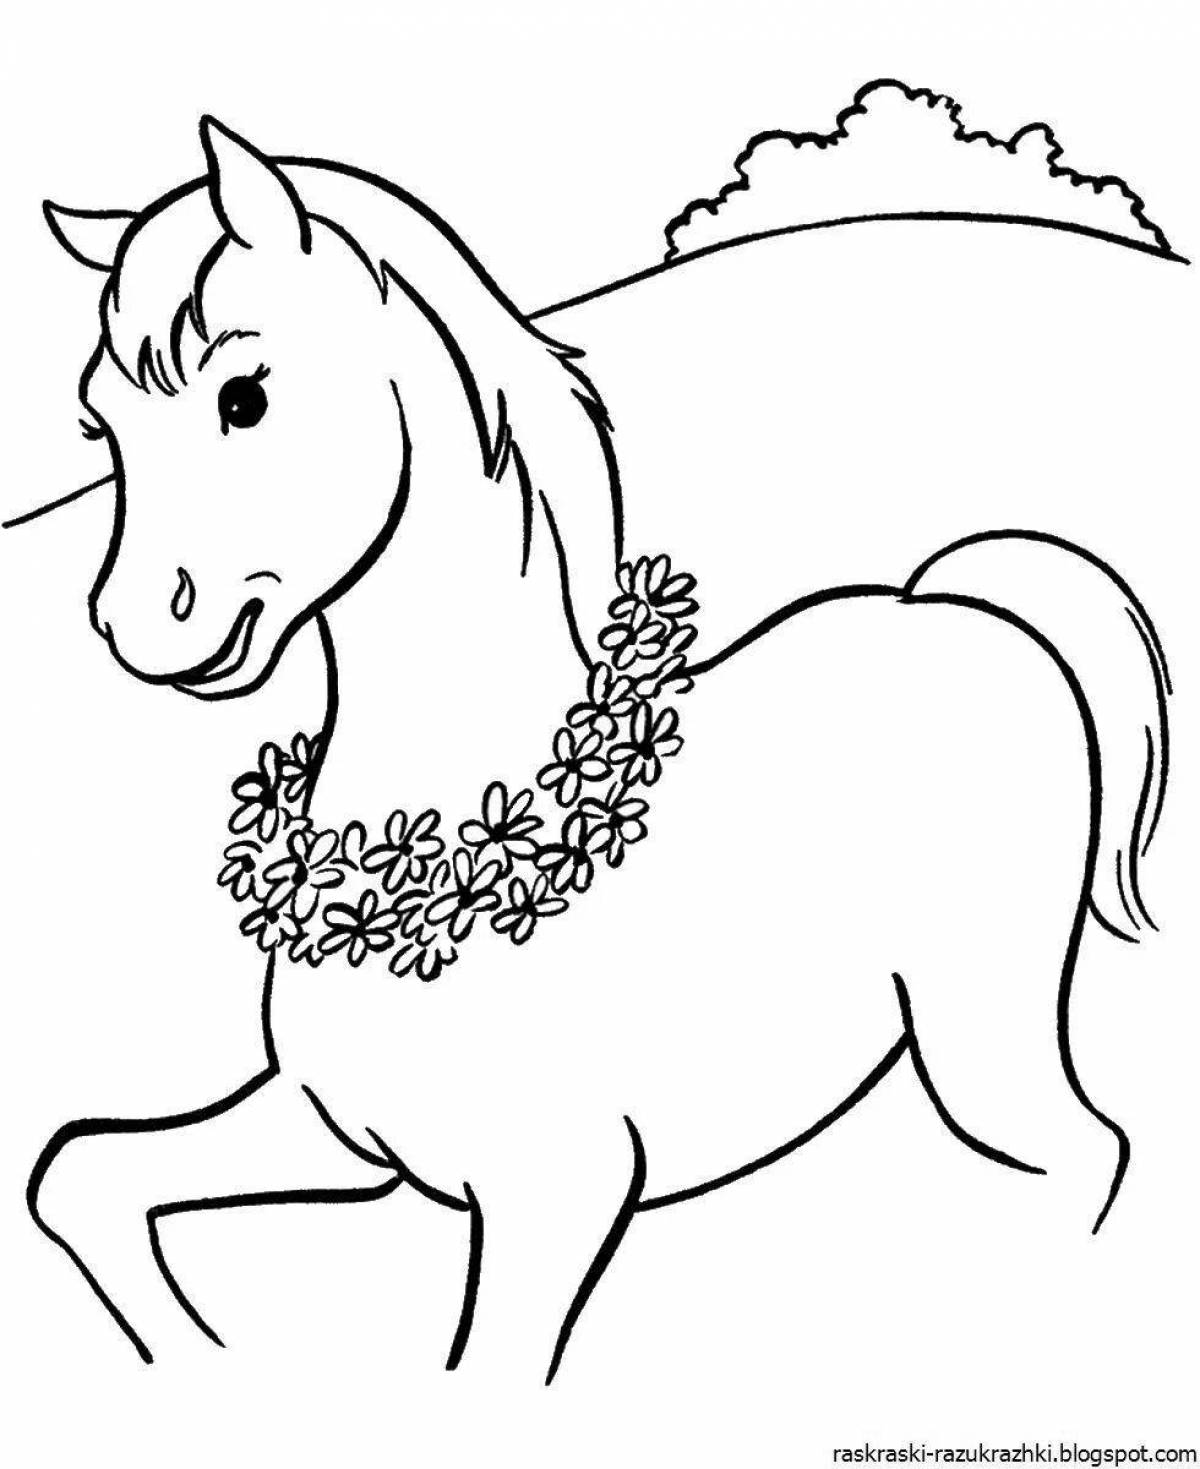 Great horse coloring book for kids 6-7 years old